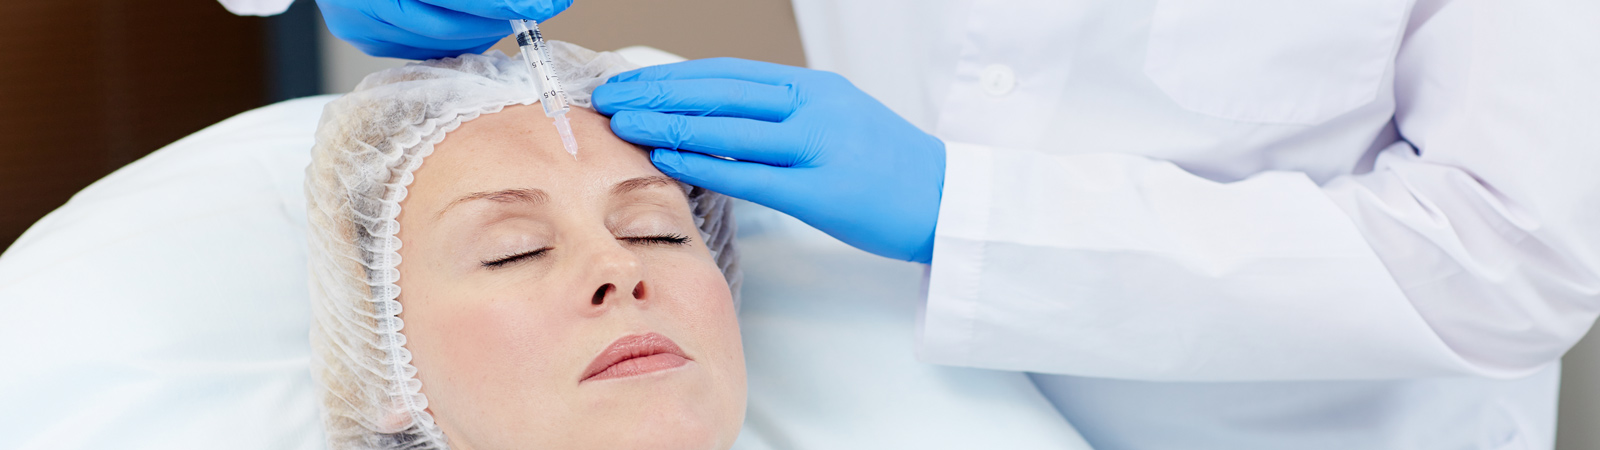 5 Different Areas That Can Be Treated With Botox